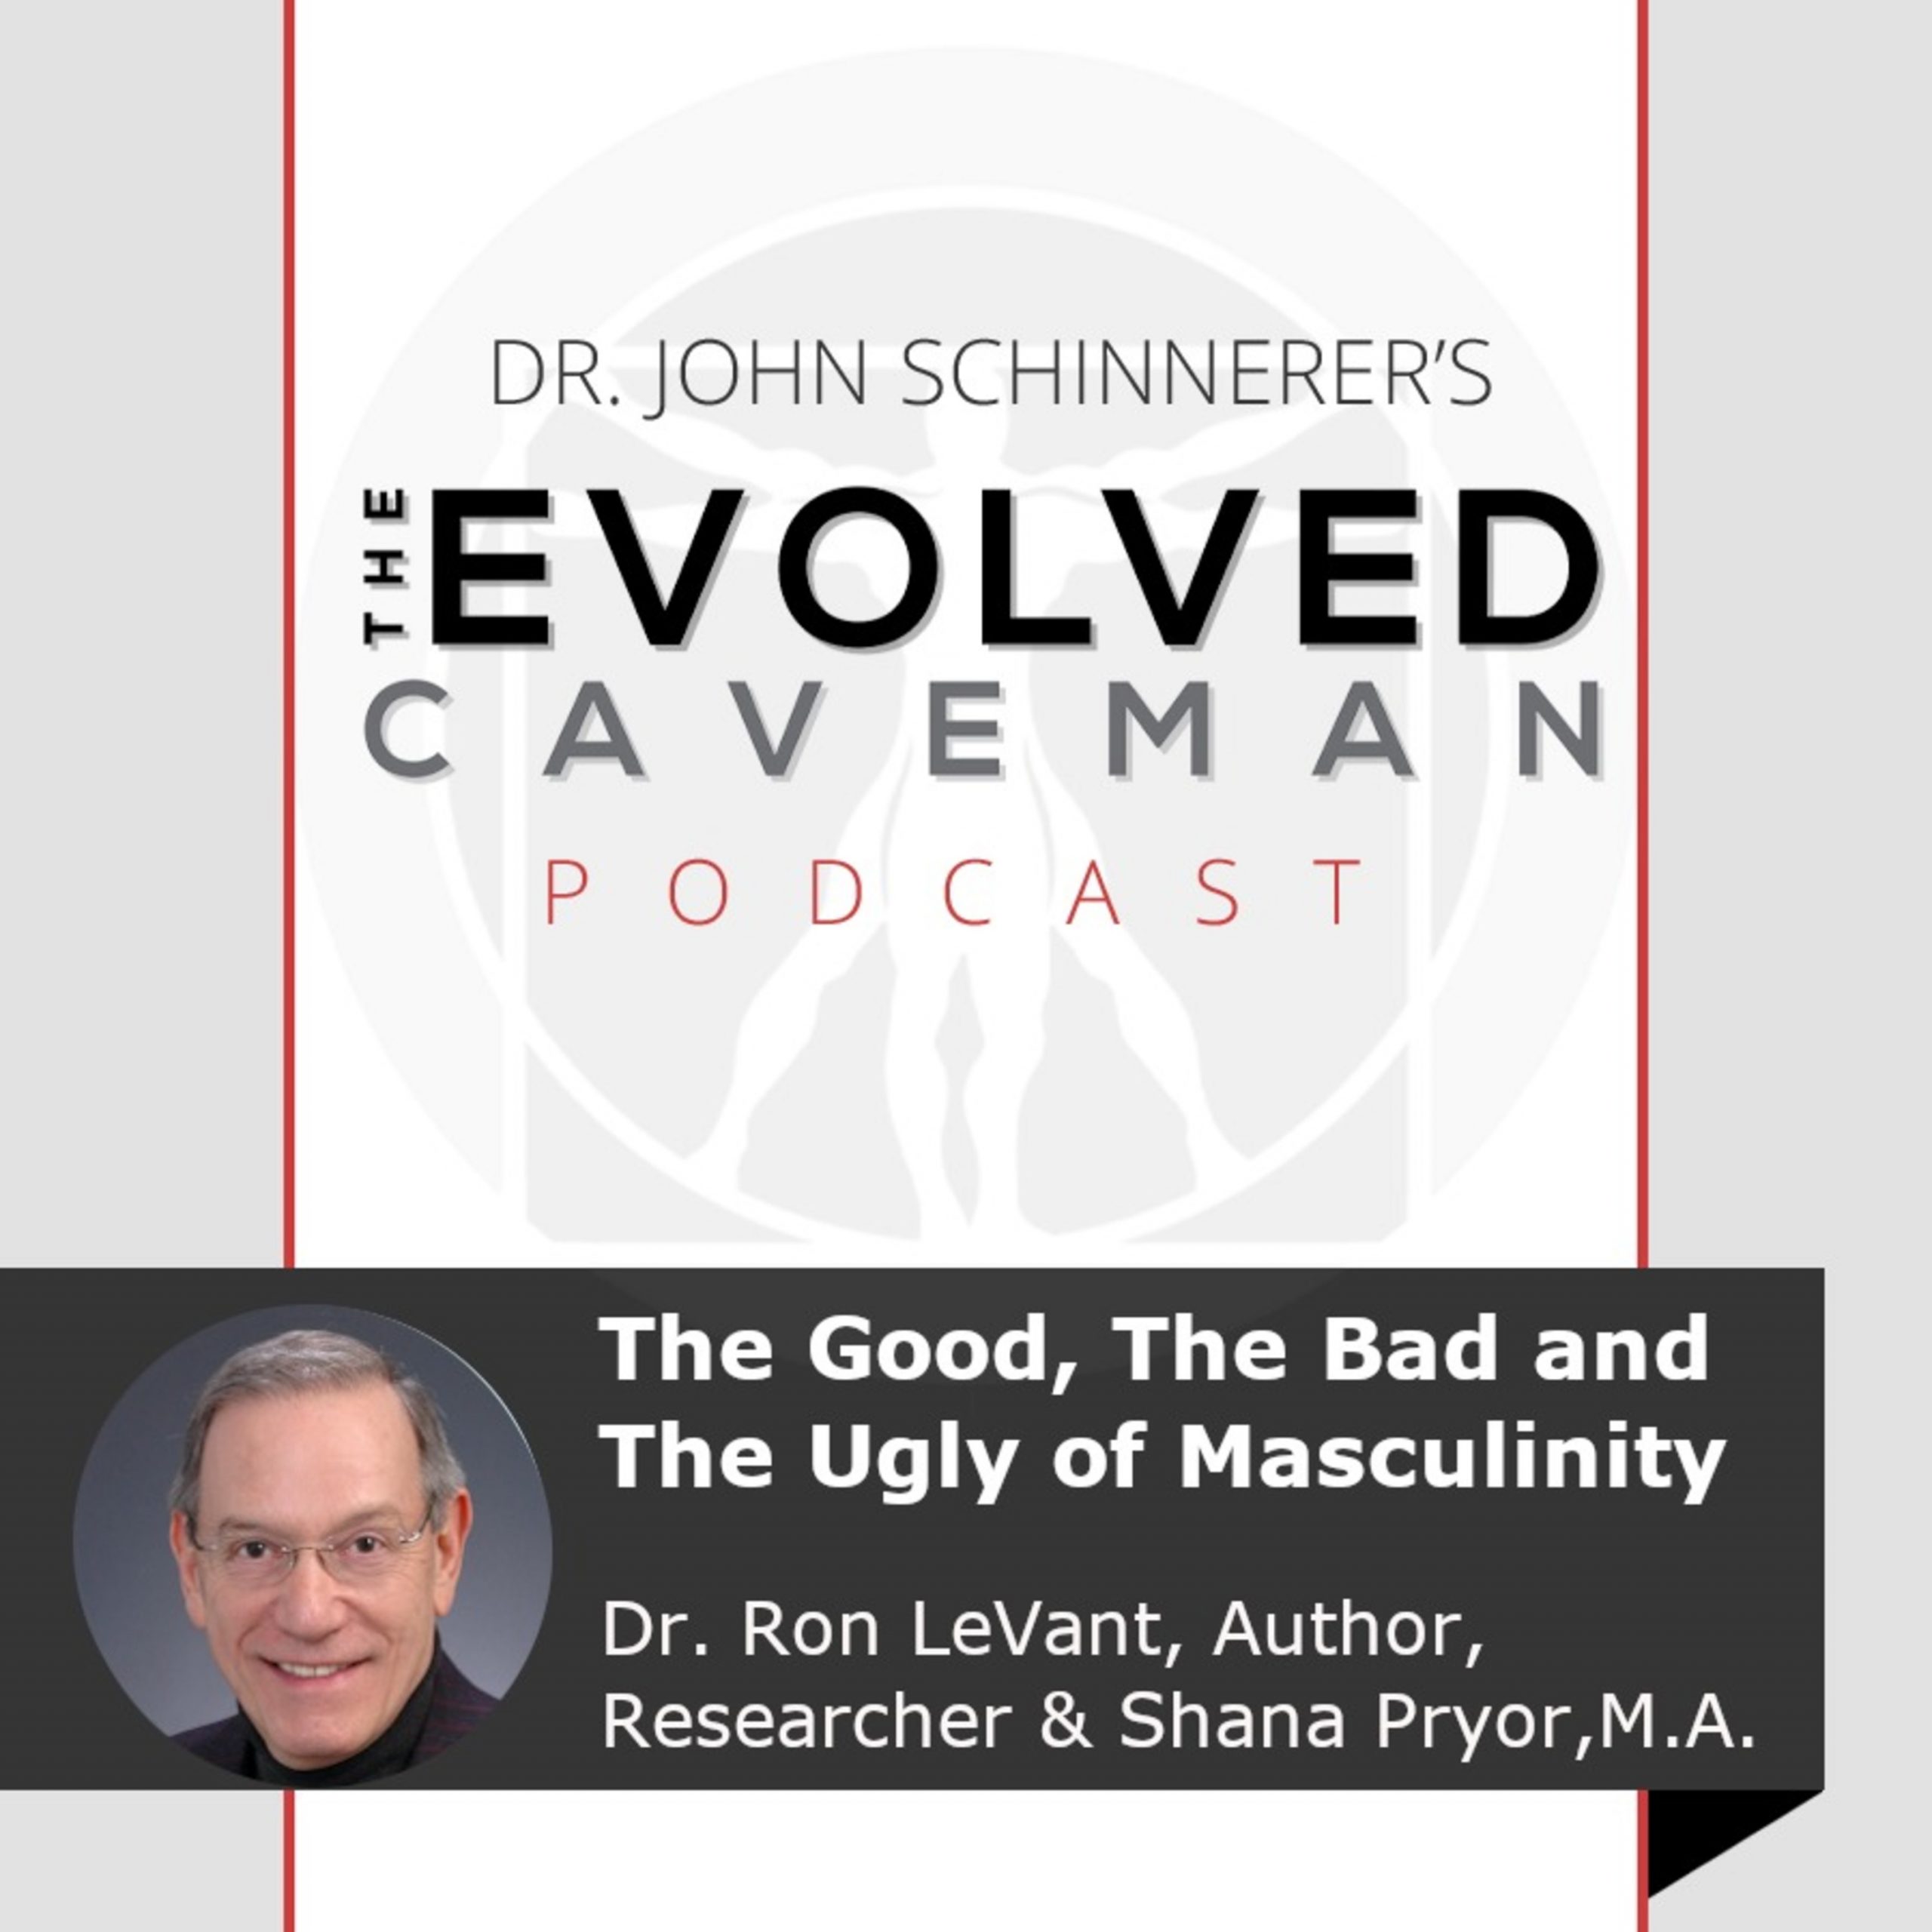 The Good, The Bad And The Ugly of Masculinity